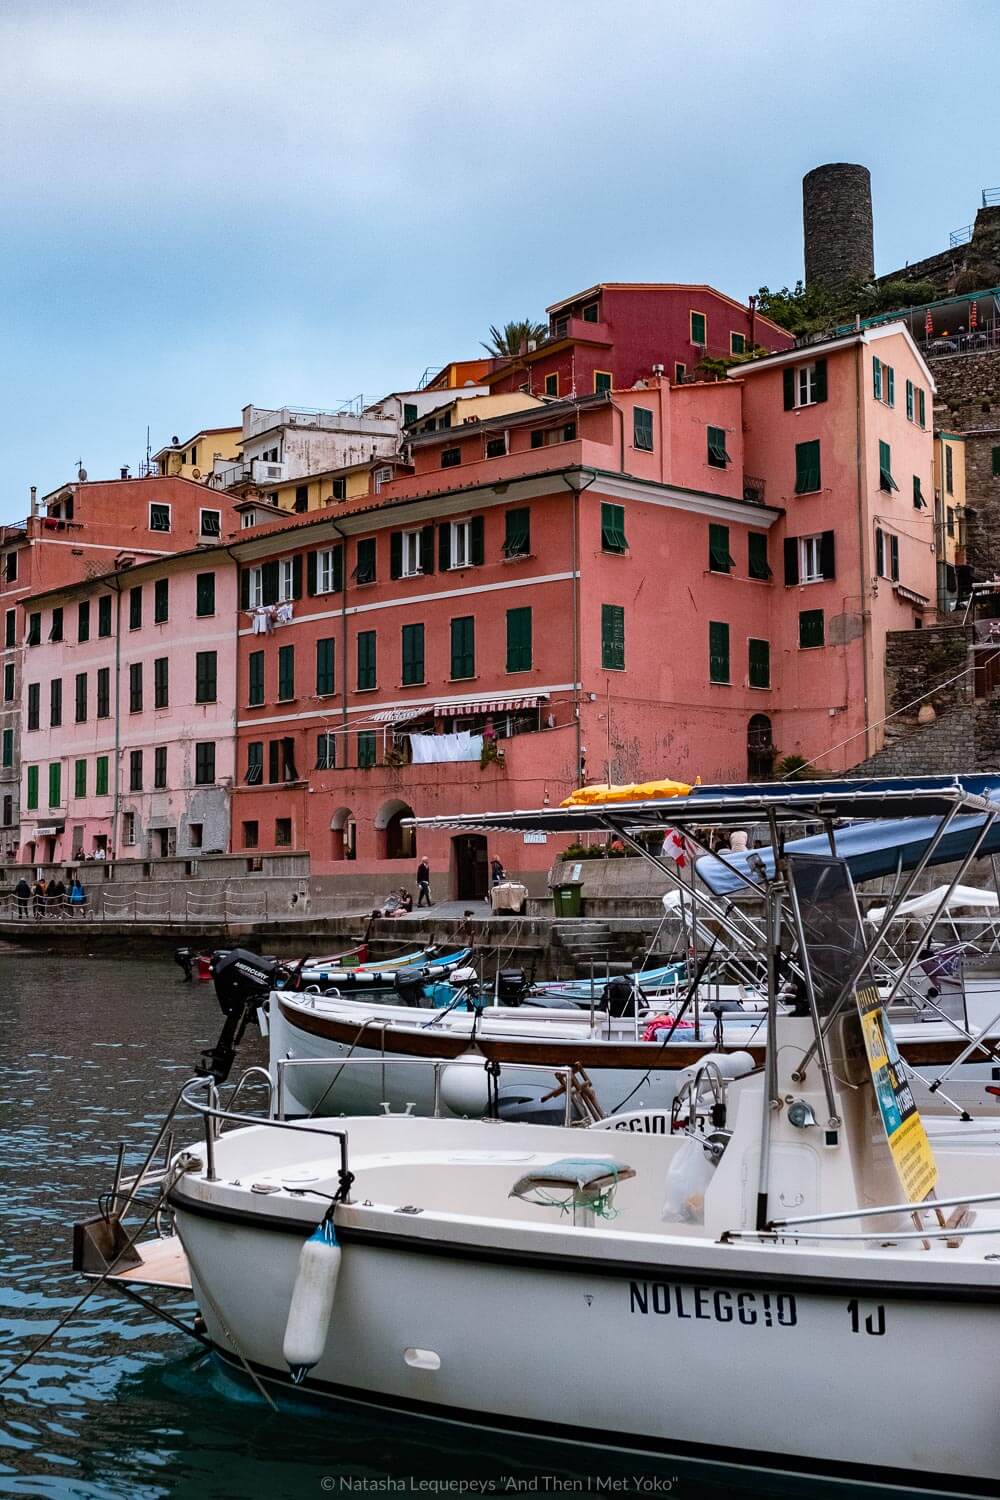 Boats at Vernazza, Cinque Terre. Travel photography and guide by © Natasha Lequepeys for "And Then I Met Yoko". #cinqueterre #italy #travelphotography